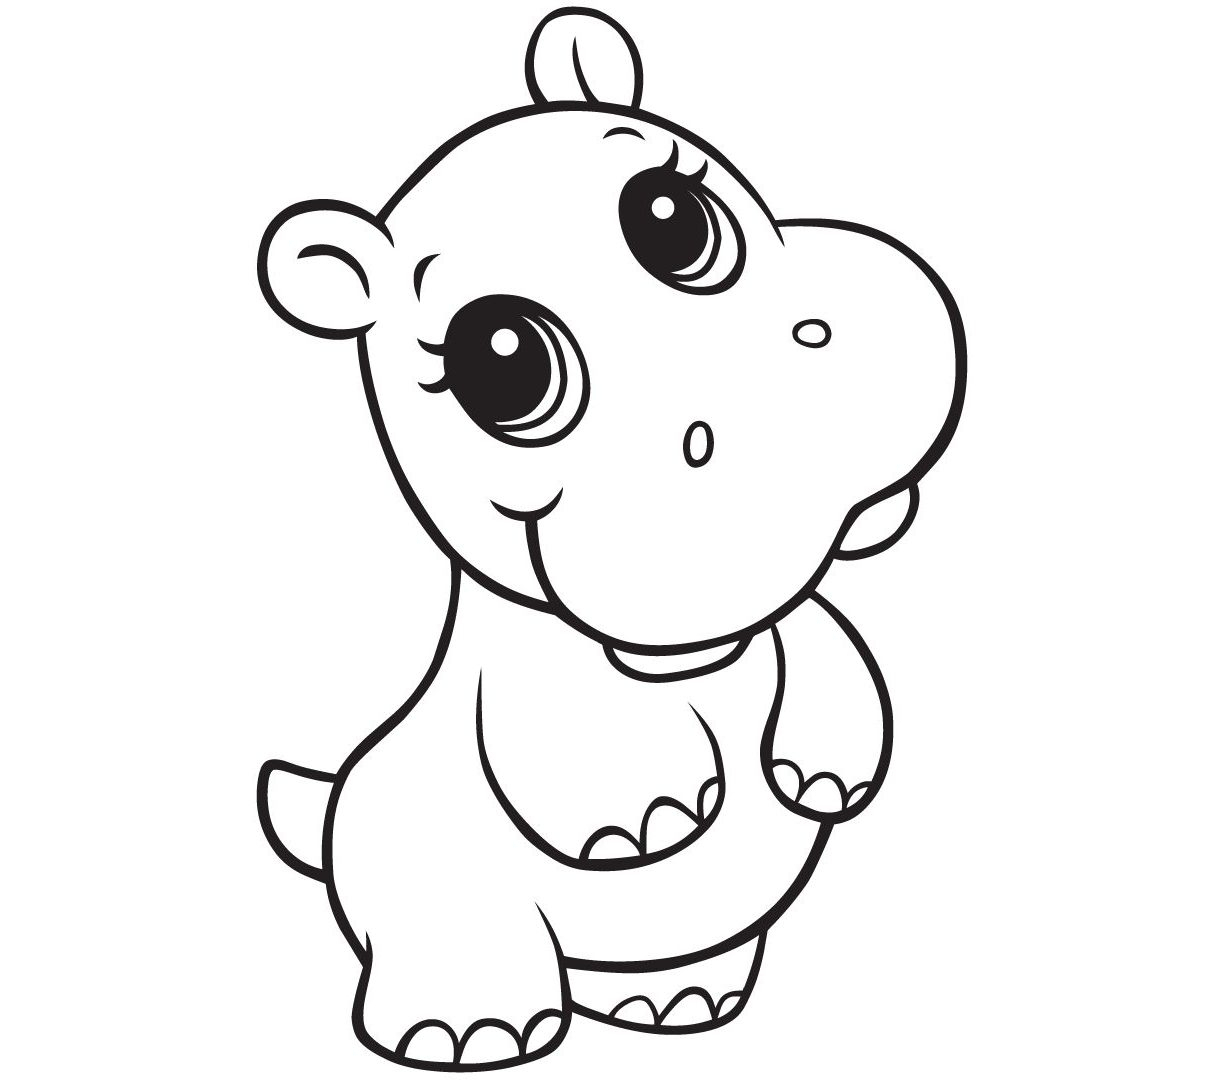 Top How To Draw A Hippo Don t miss out | howdrawart3